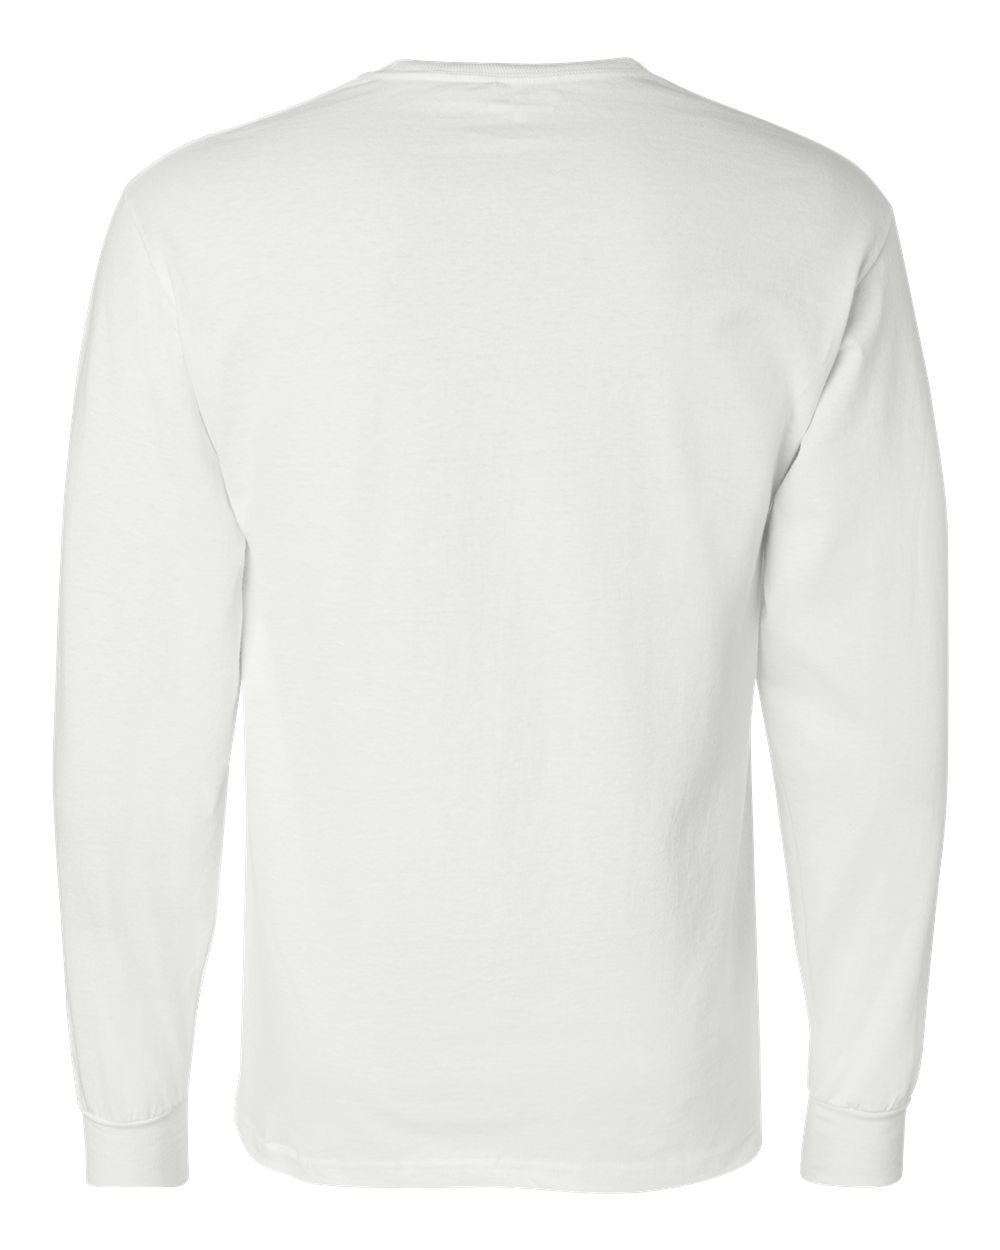 Champion Mens Long Sleeve Cotton T Shirt Blank Plain Solid CC8C up to ...